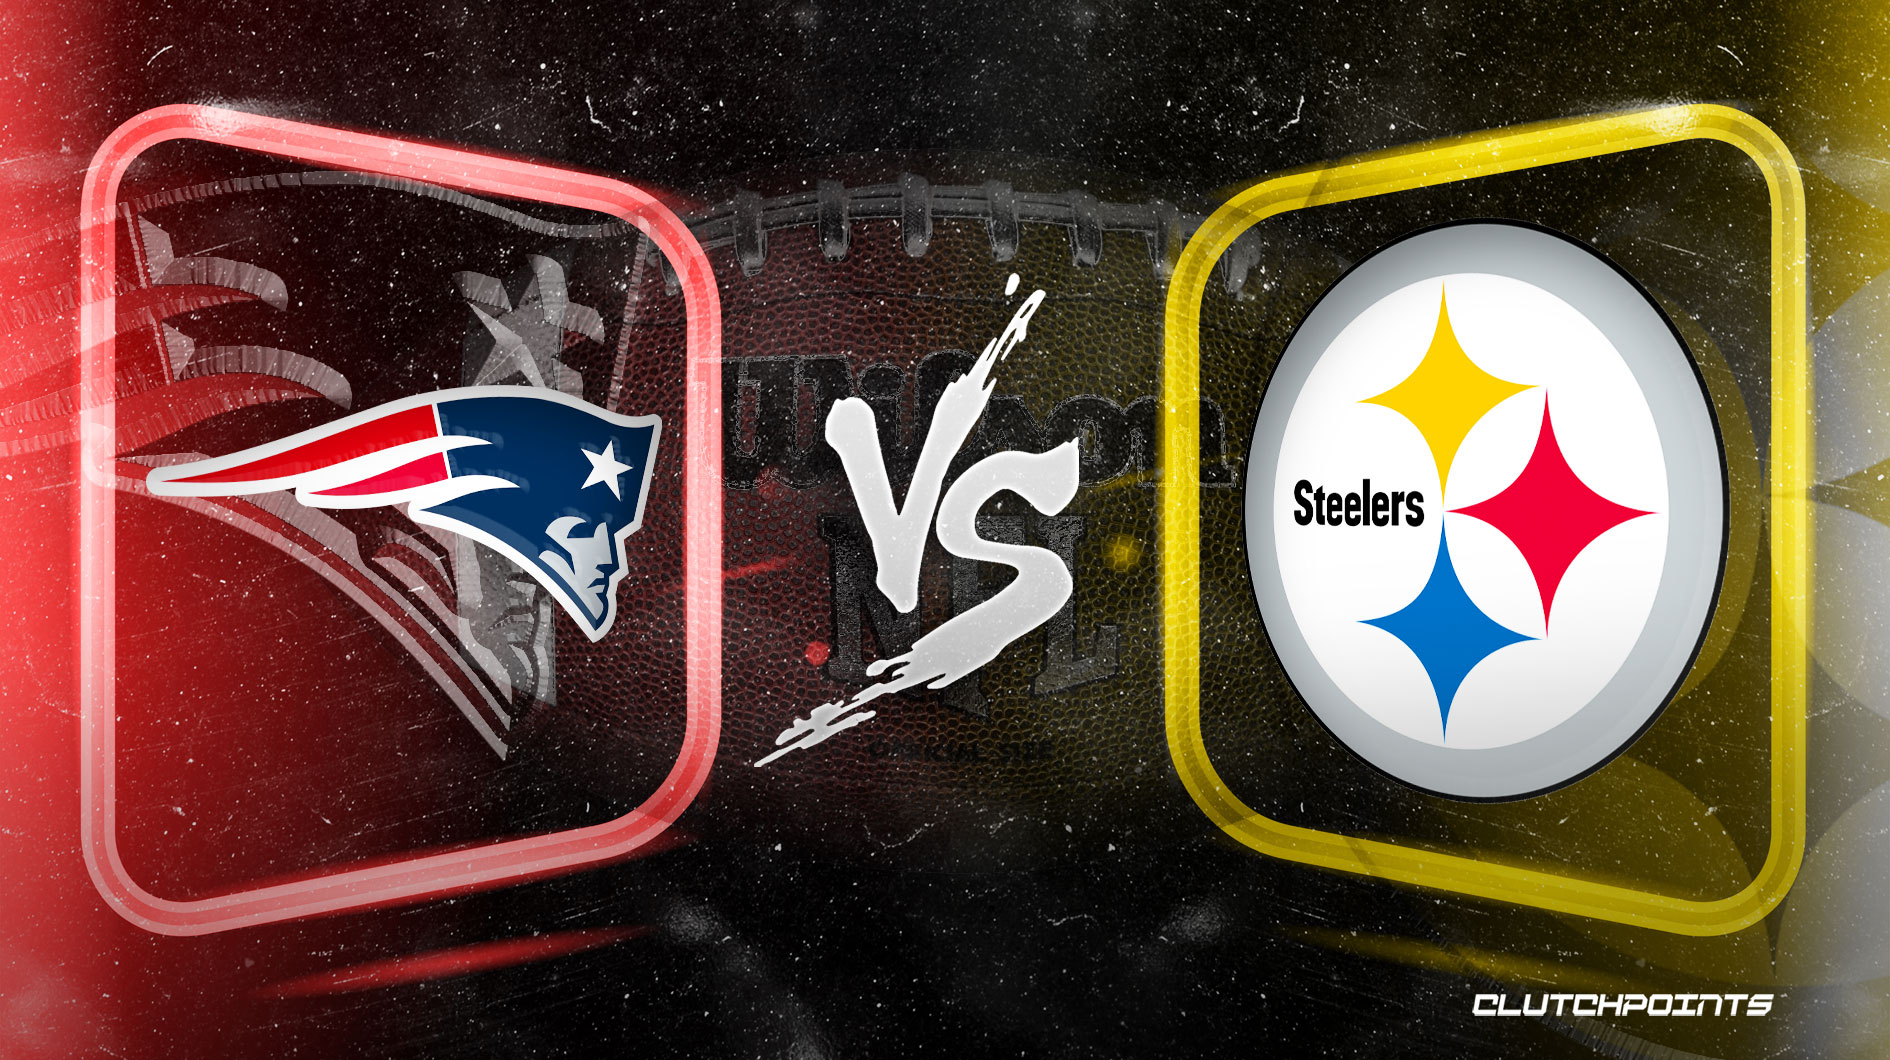 Patriots vs. Steelers prediction odds and pick